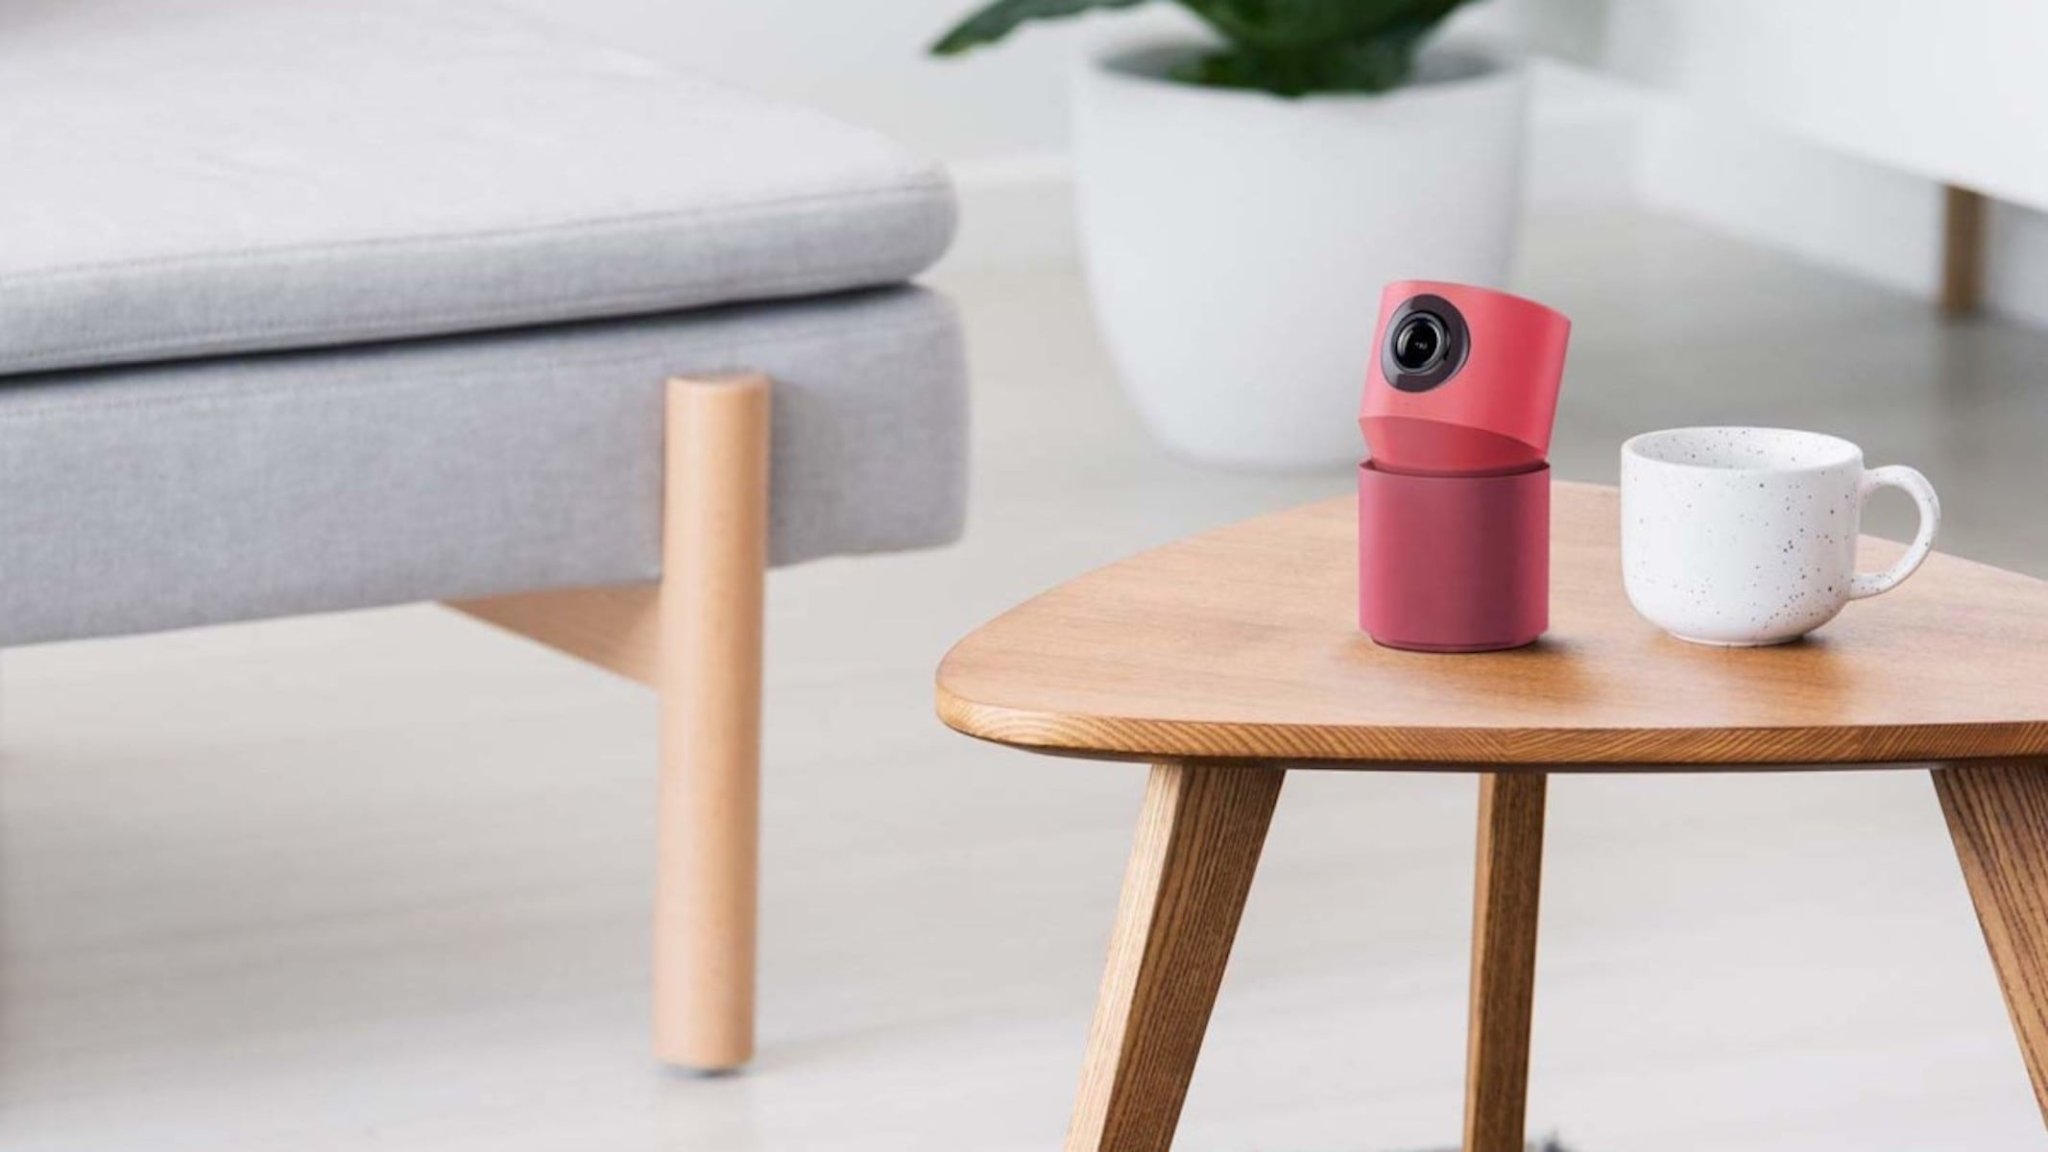 Affordable home security gadgets to make you feel safer